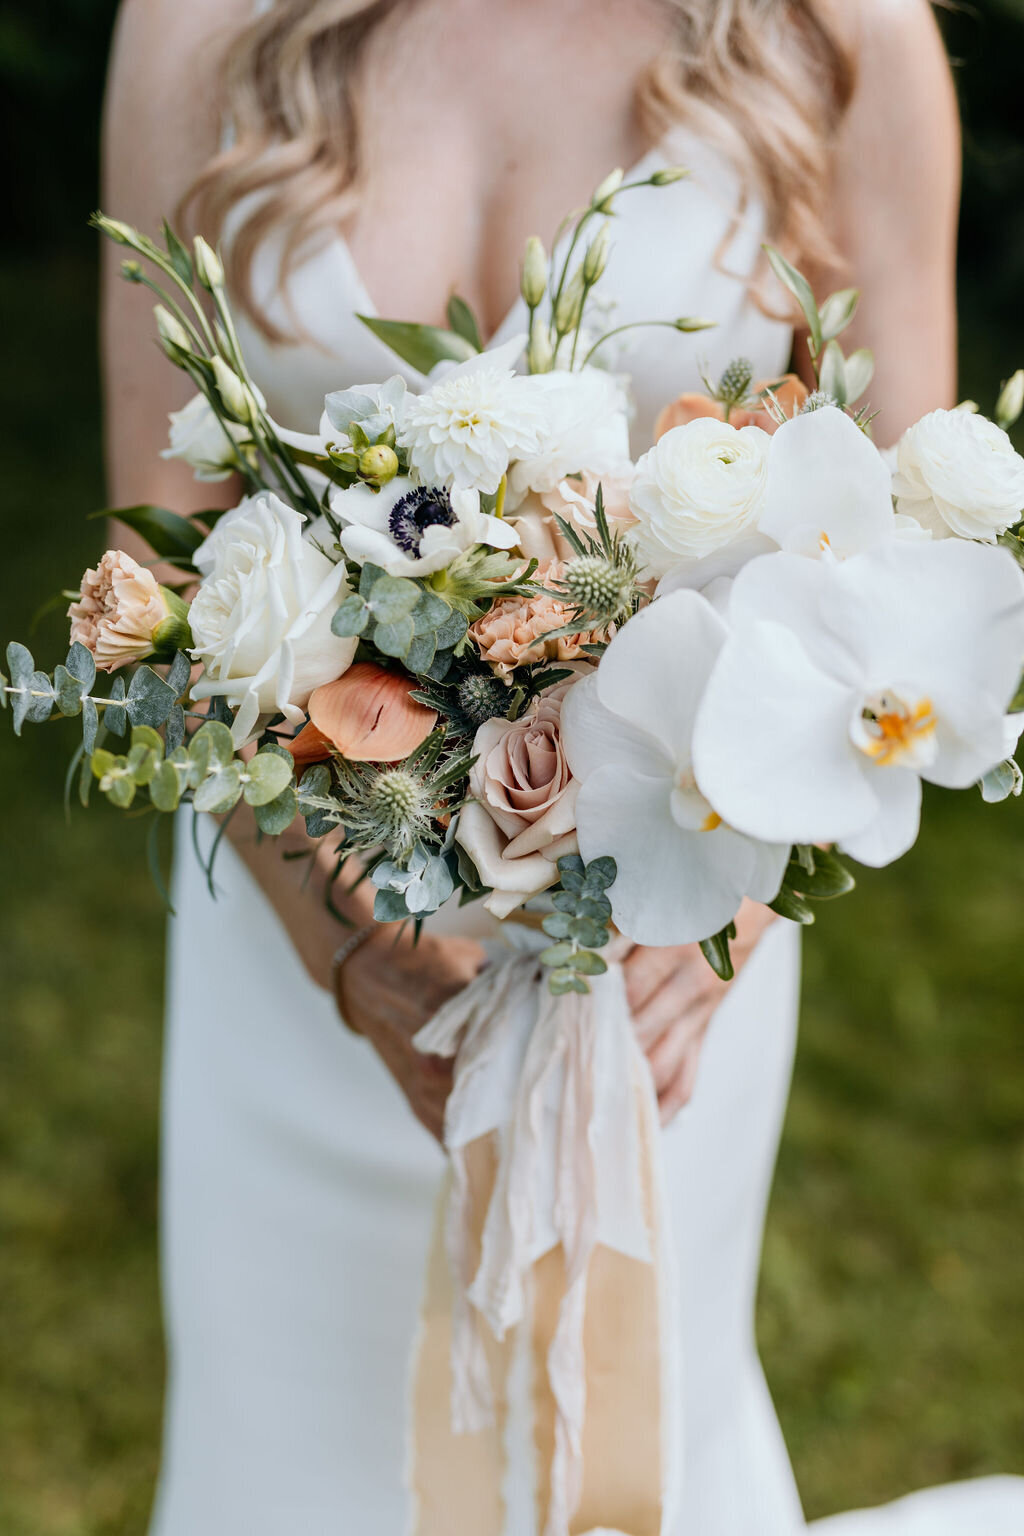 Stunning contemporary bridal bouquet held by modern bride.